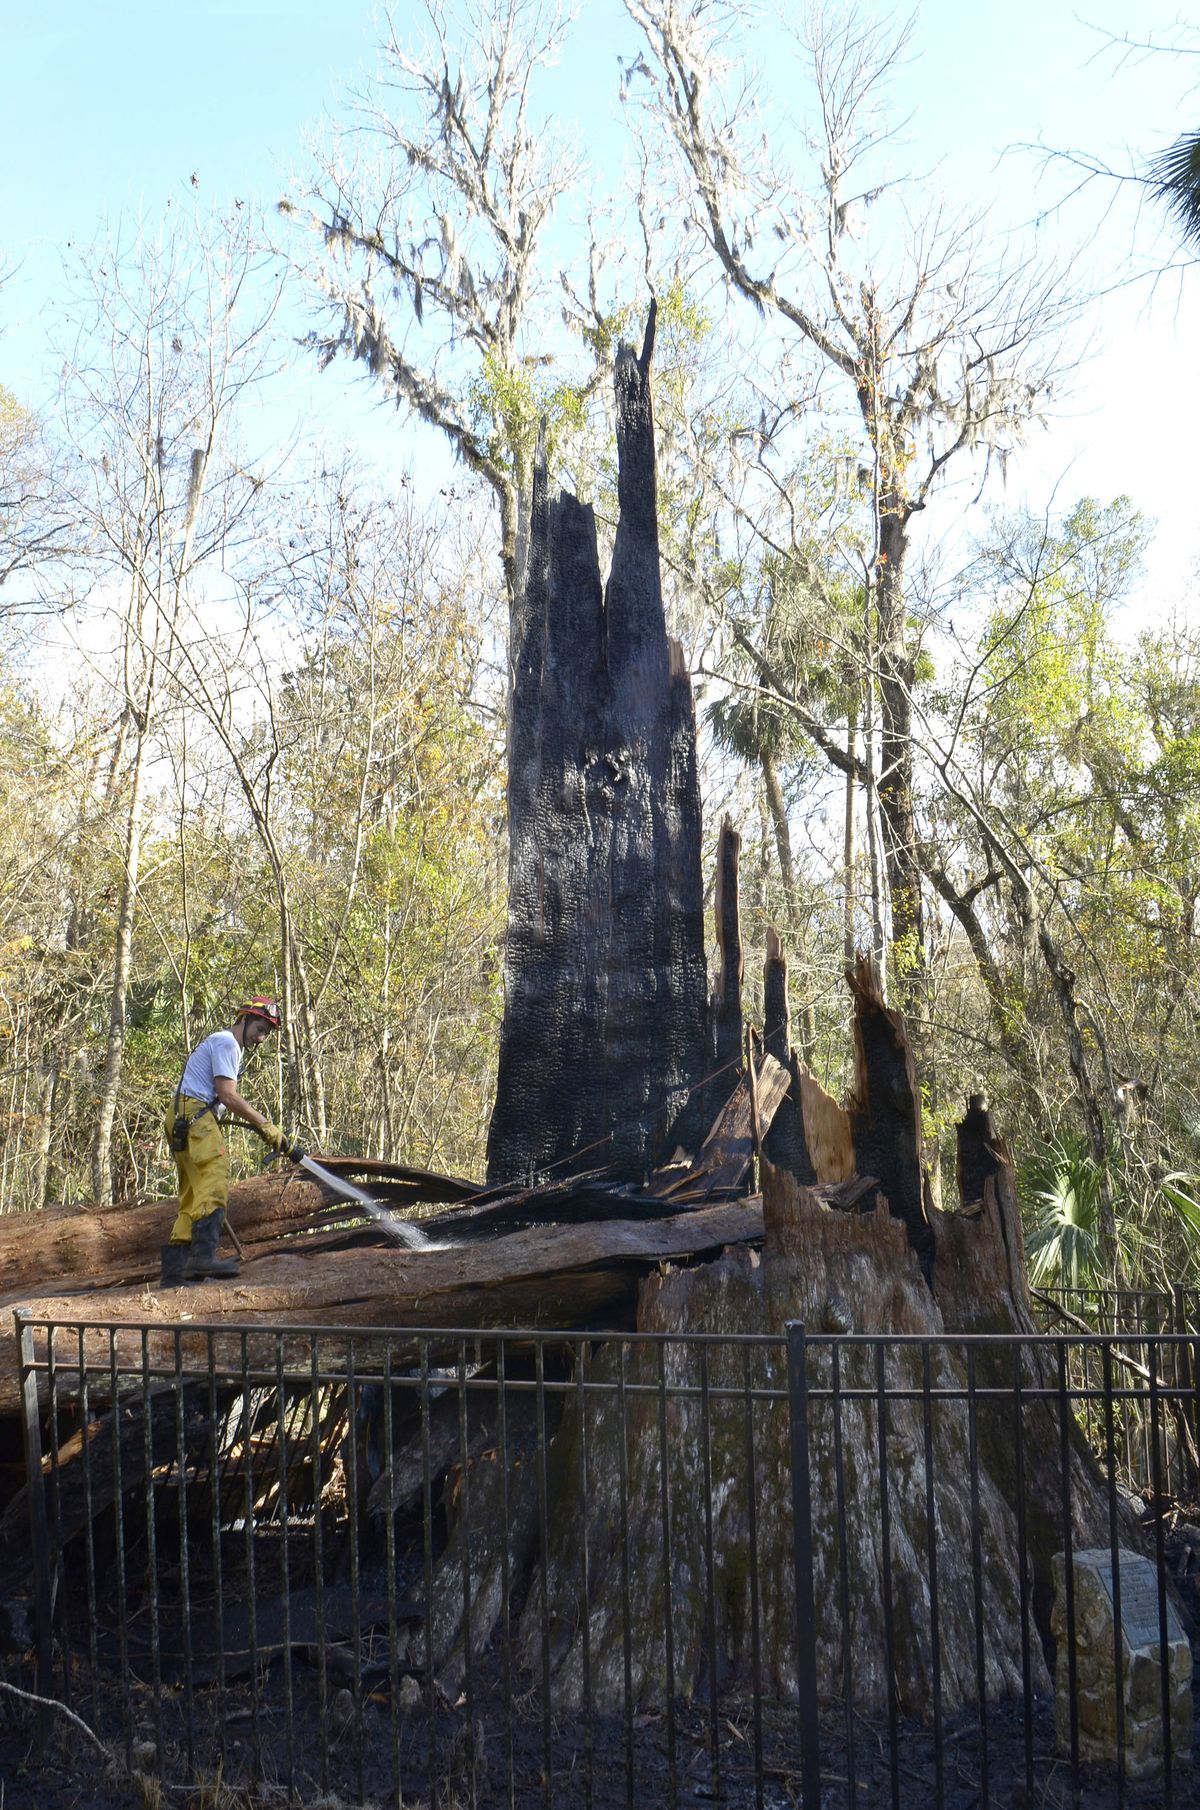 A firefighter applies water to the smoldering base of “The Senator” at Big Tree Park in Longwood, Fla., on Monday. (Associated Press)